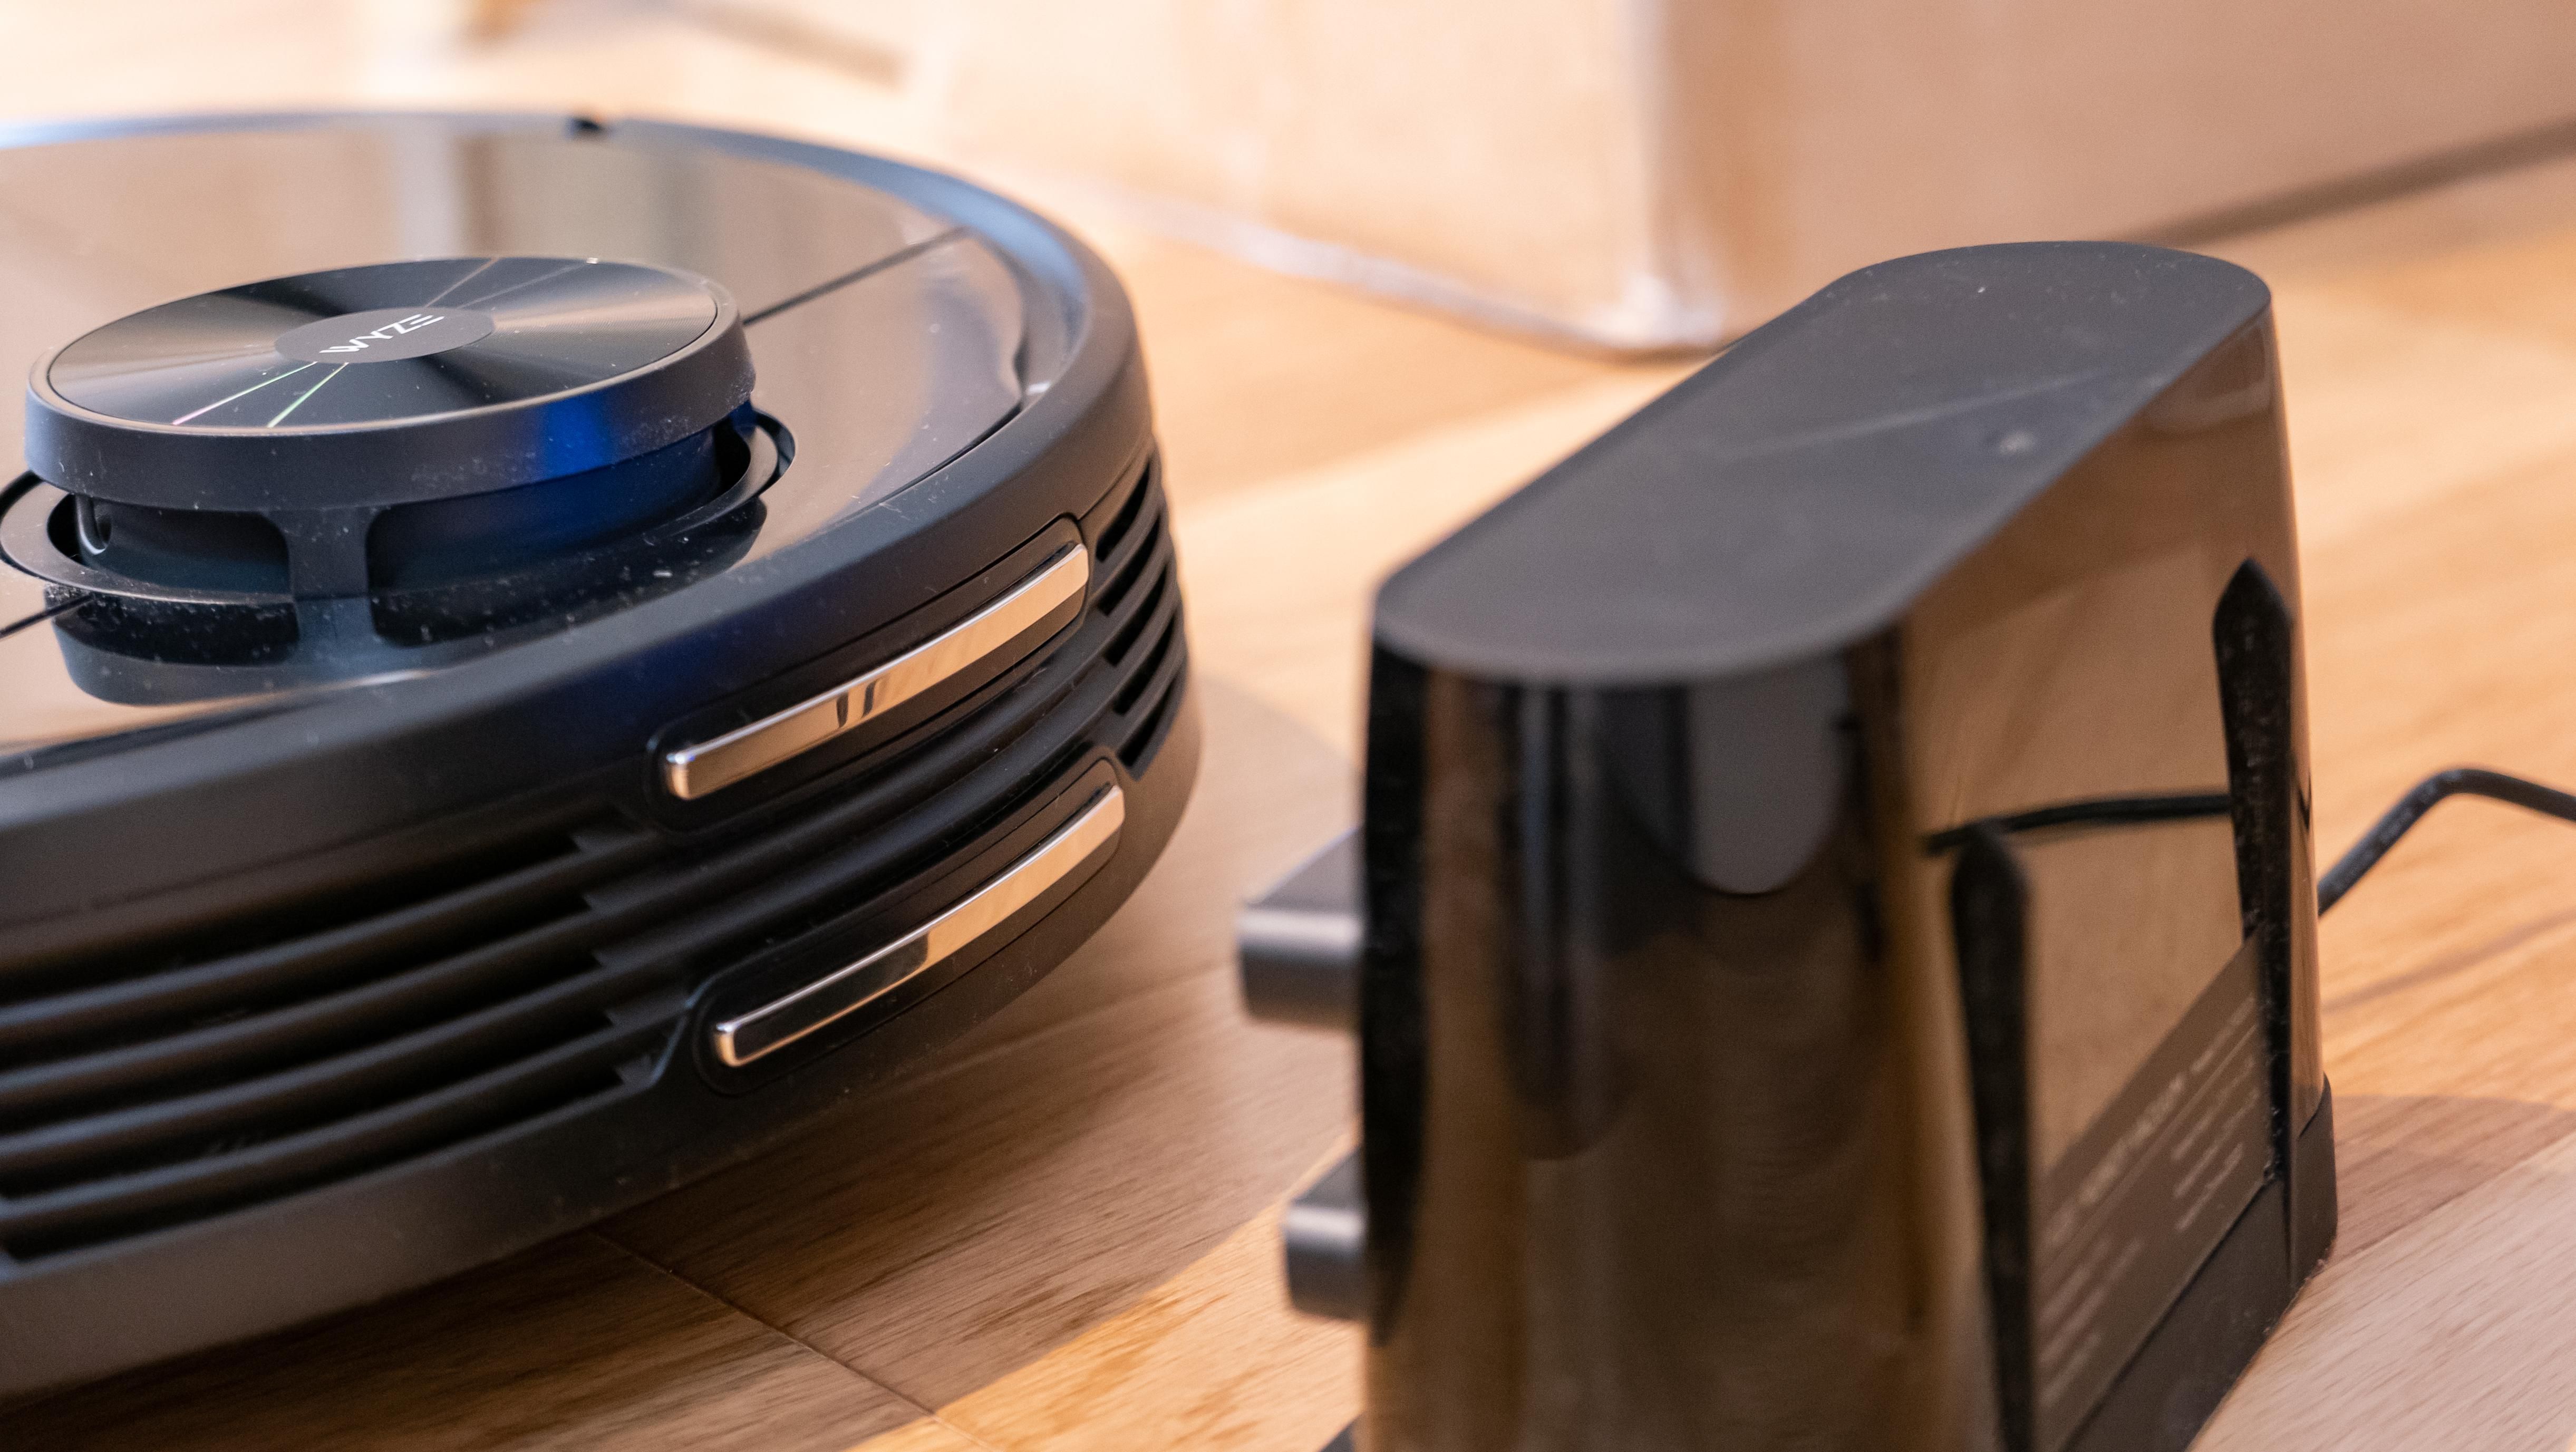 The Wyze Robot Vacuum and its charging dock